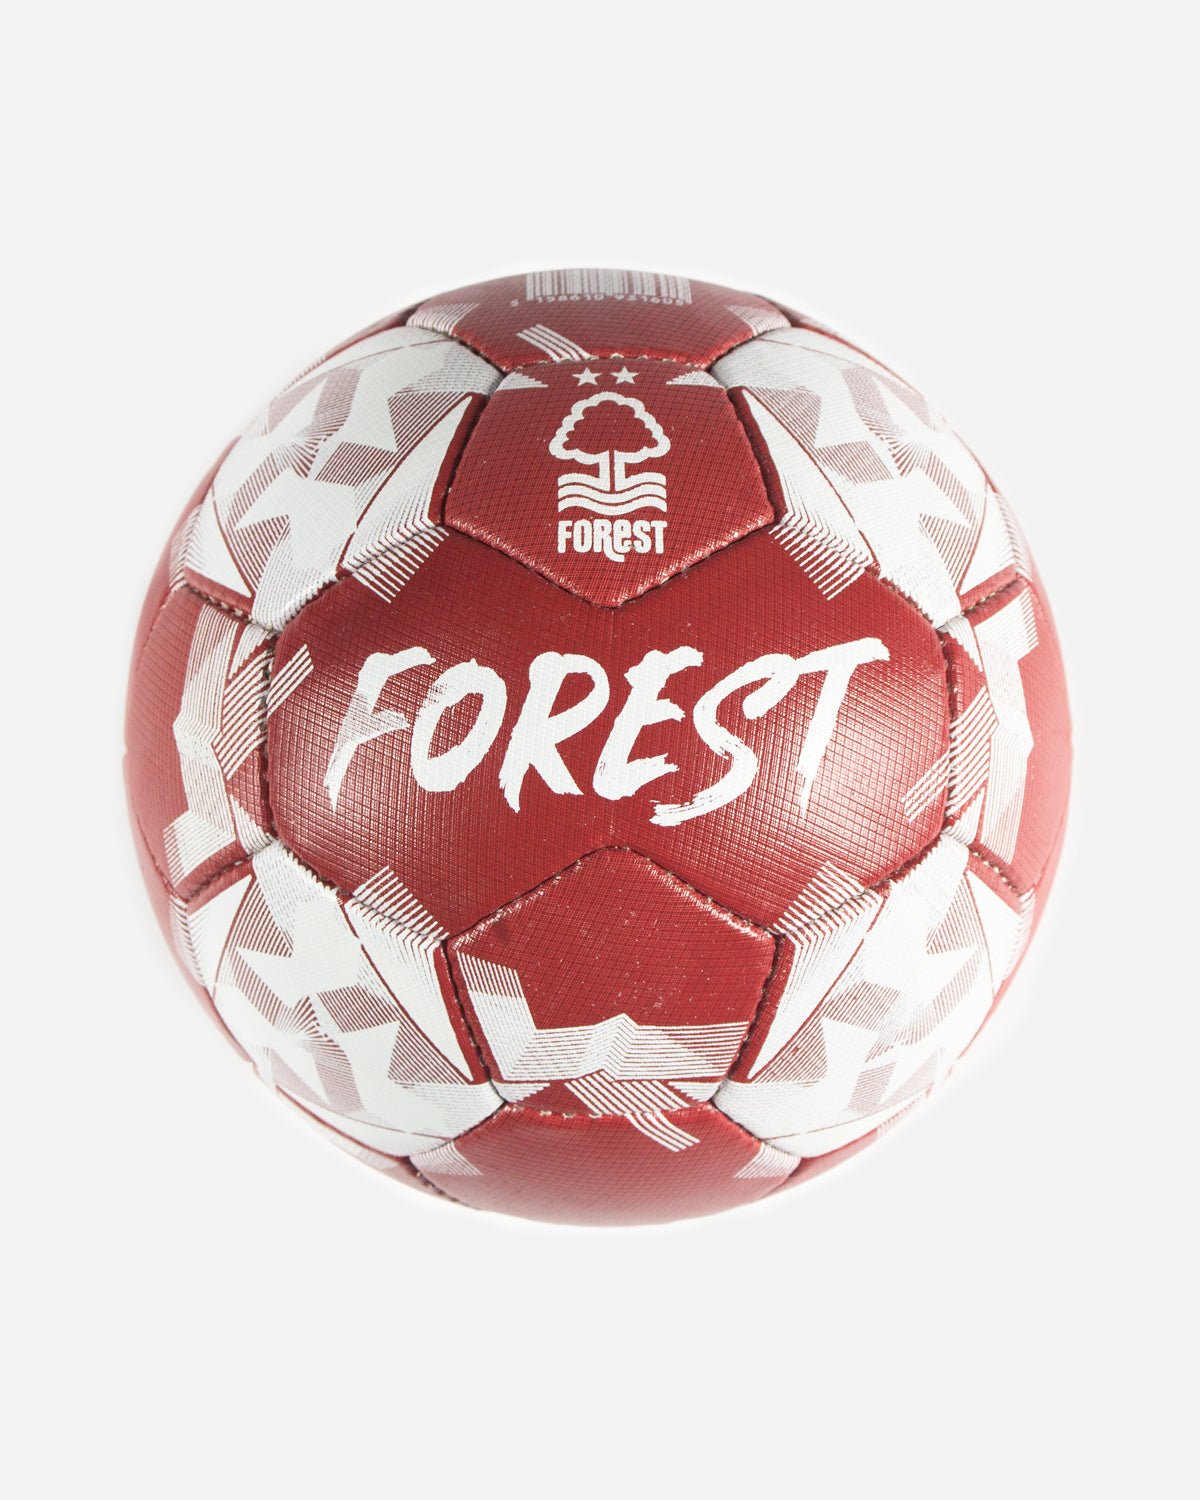 NFFC Forest Football - Nottingham Forest FC